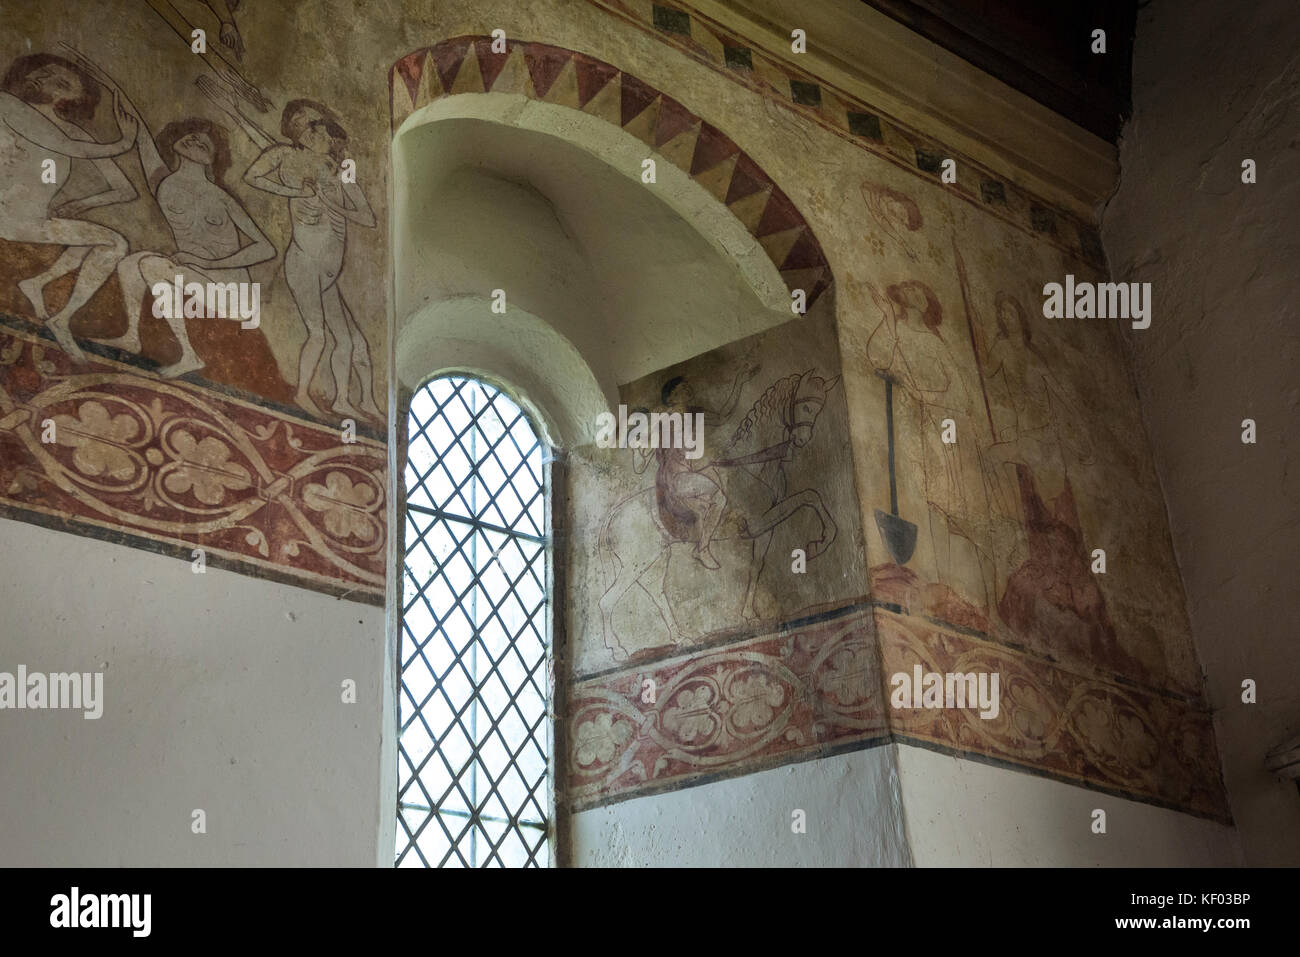 The interior of St Agatha's church at Easby Abbey near Richmond, North Yorkshire, England. Stock Photo